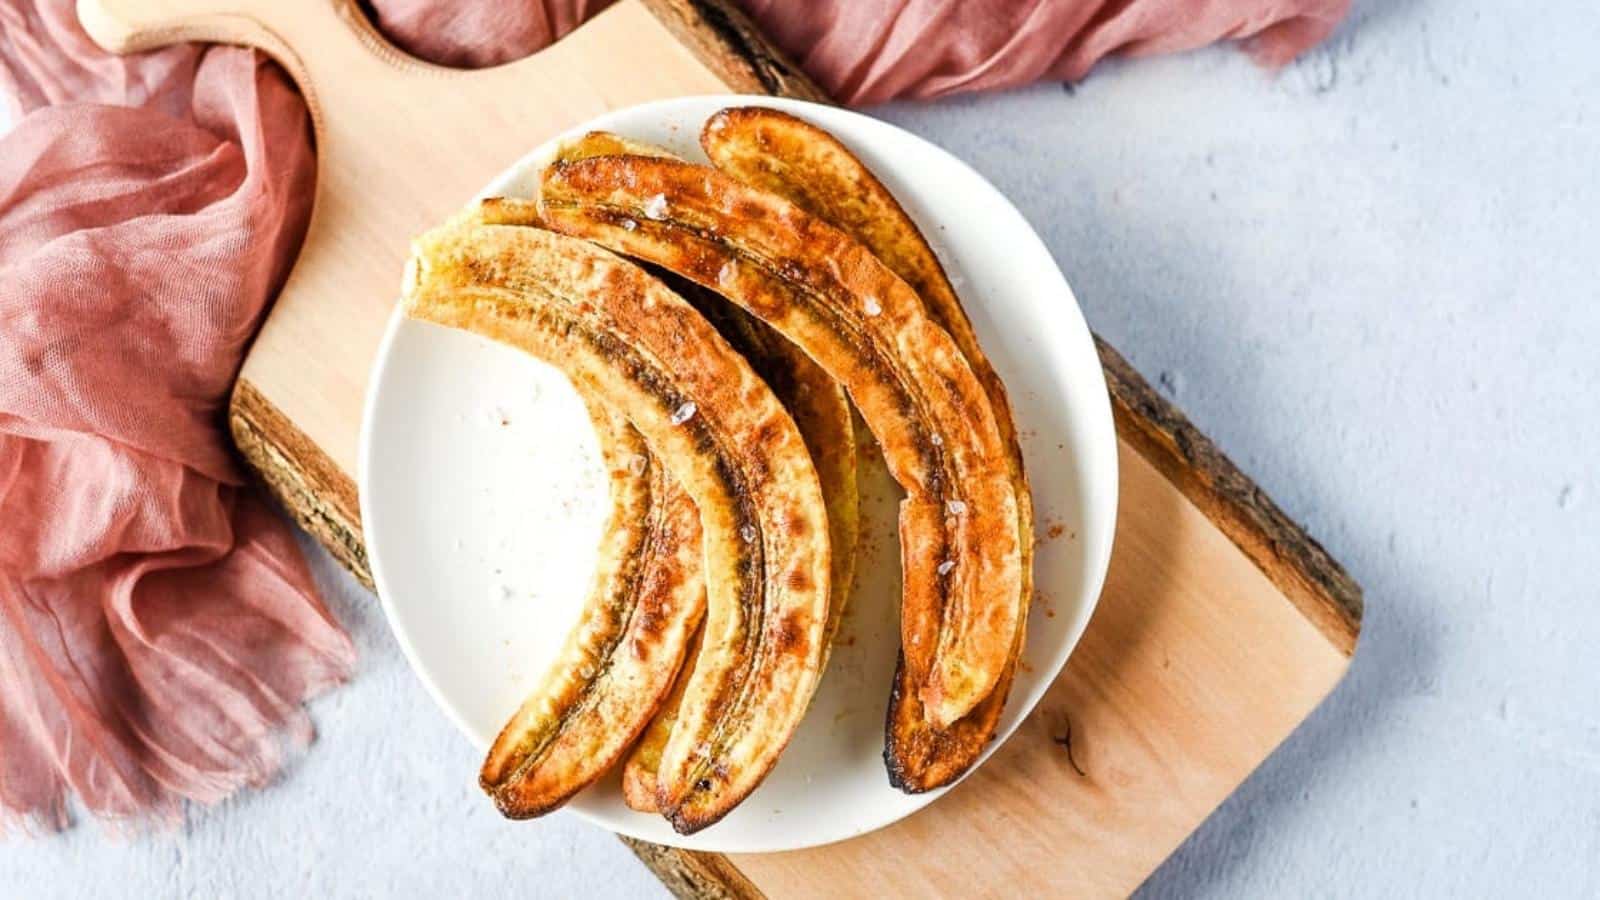 Air fryer bananas on a white plate over a rustic wooden cutting board with a pink linen.